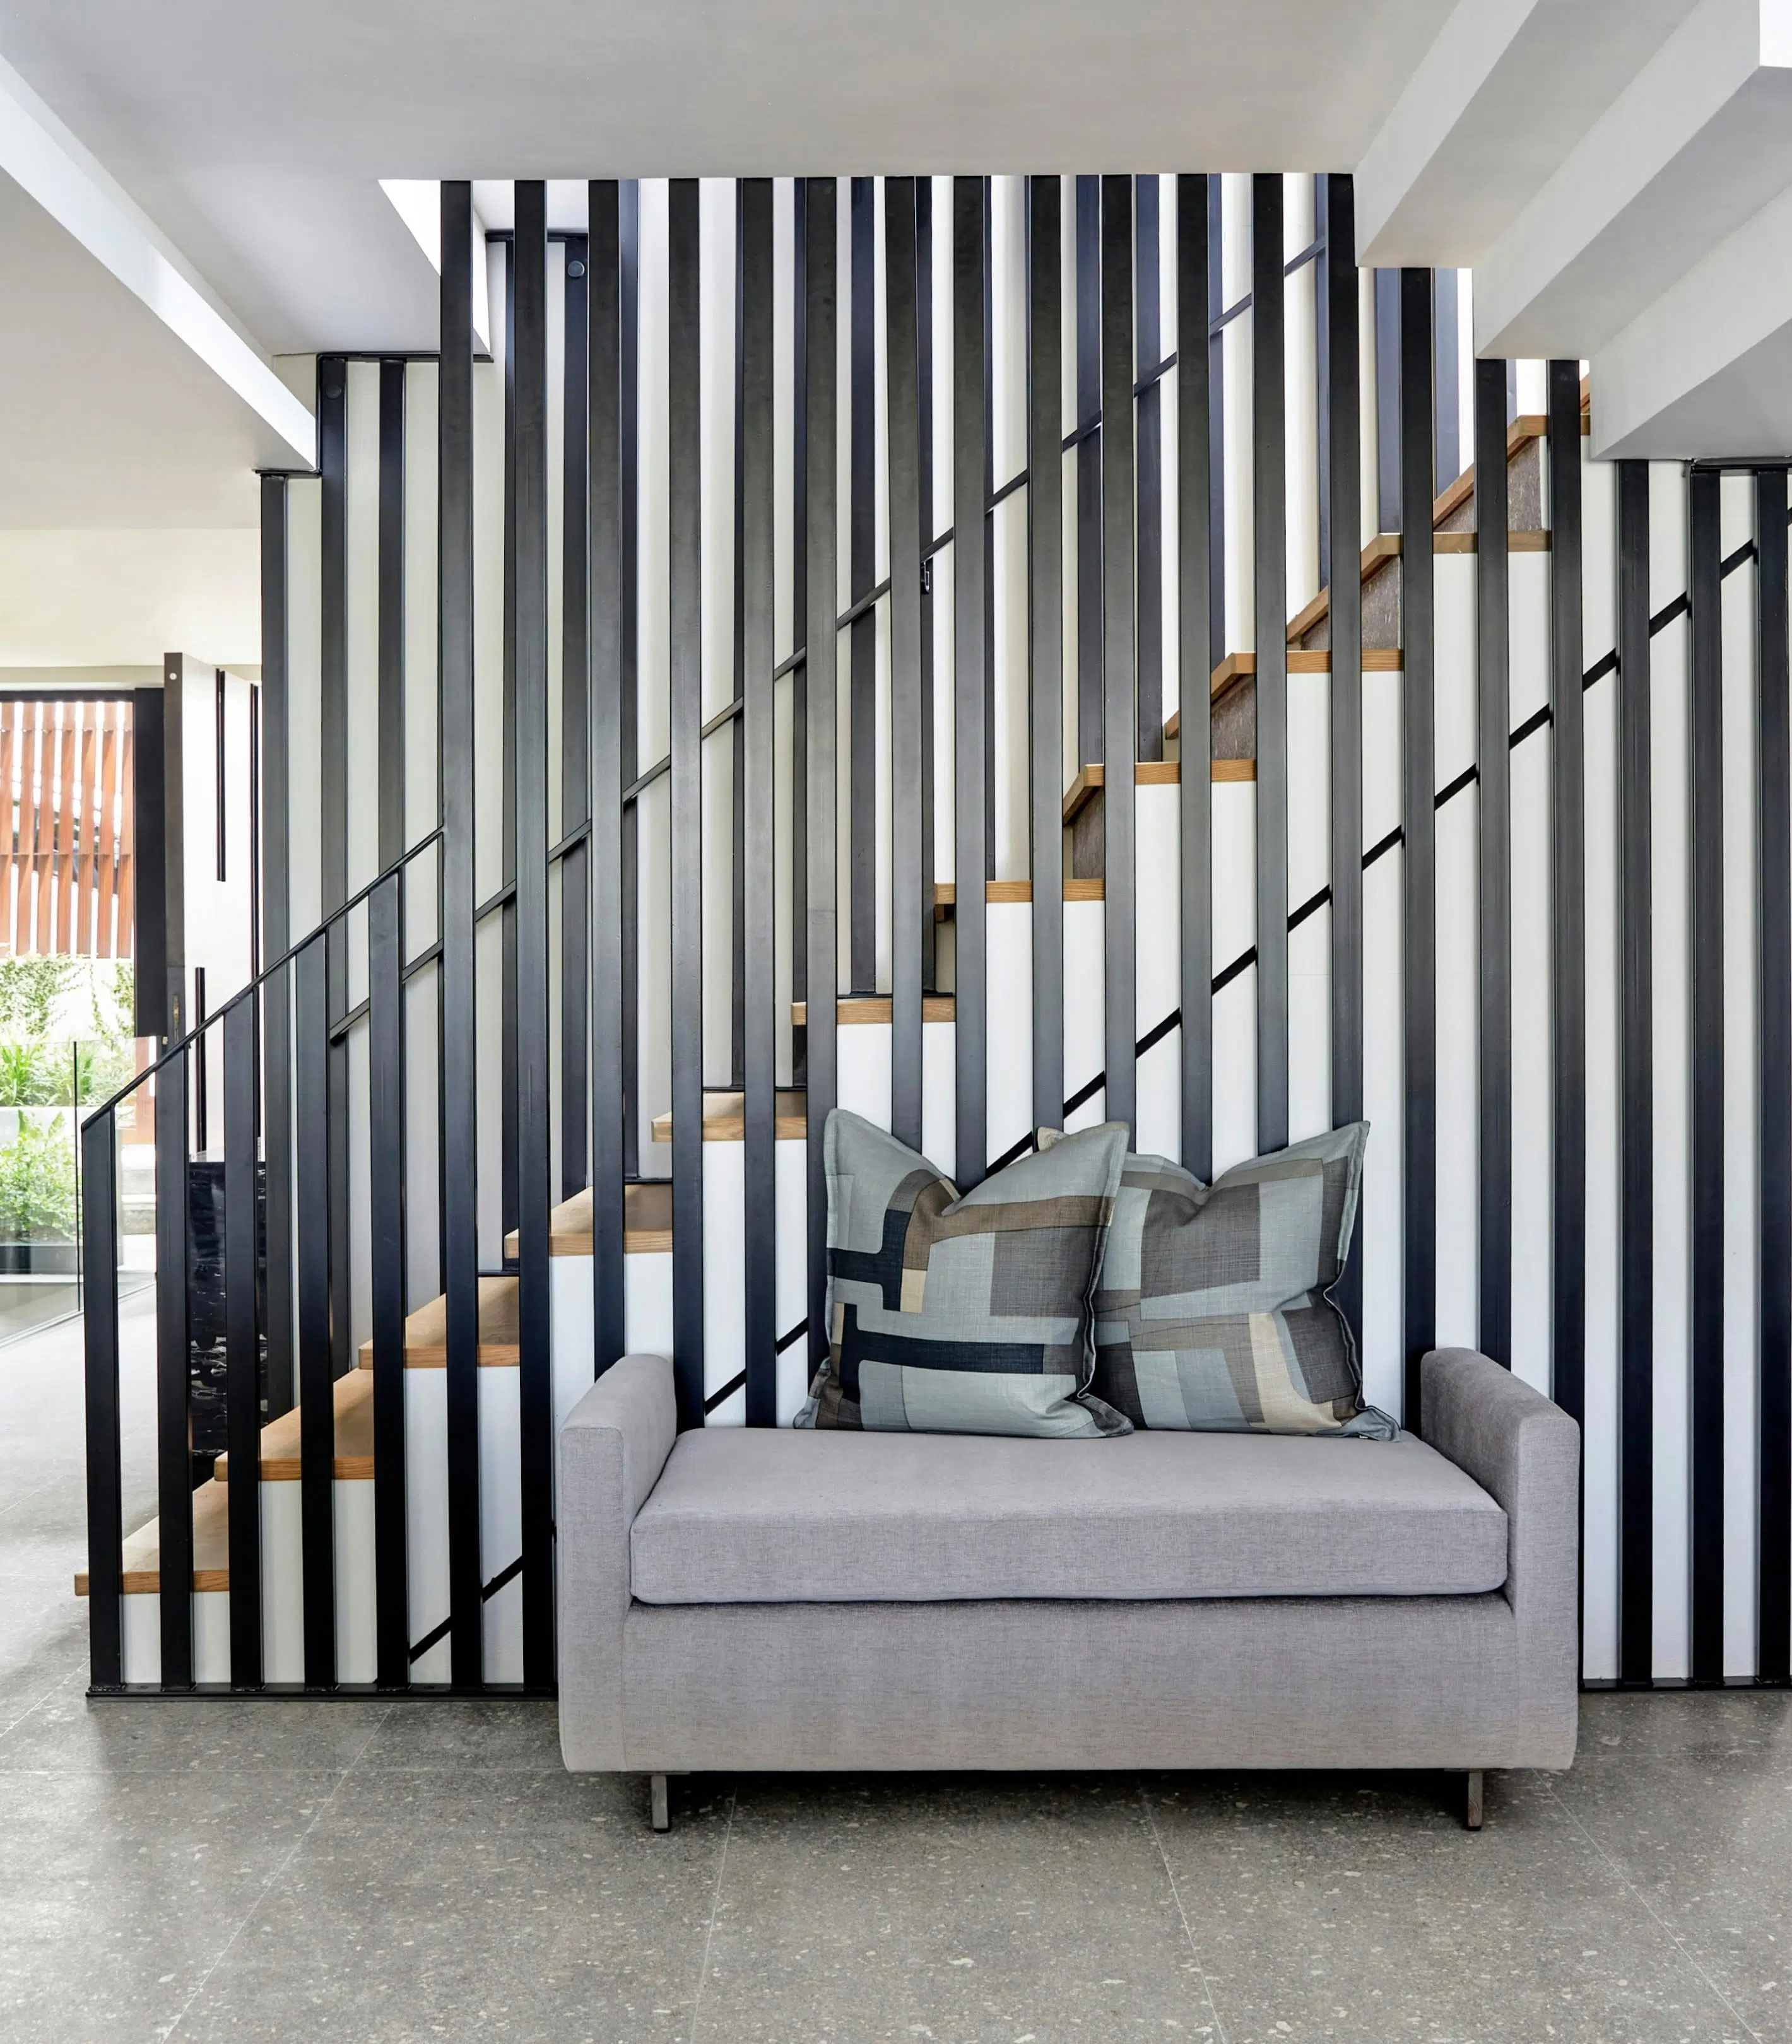 A small grey sofa sits in front of a staircase with vertical panelling in a black tone.